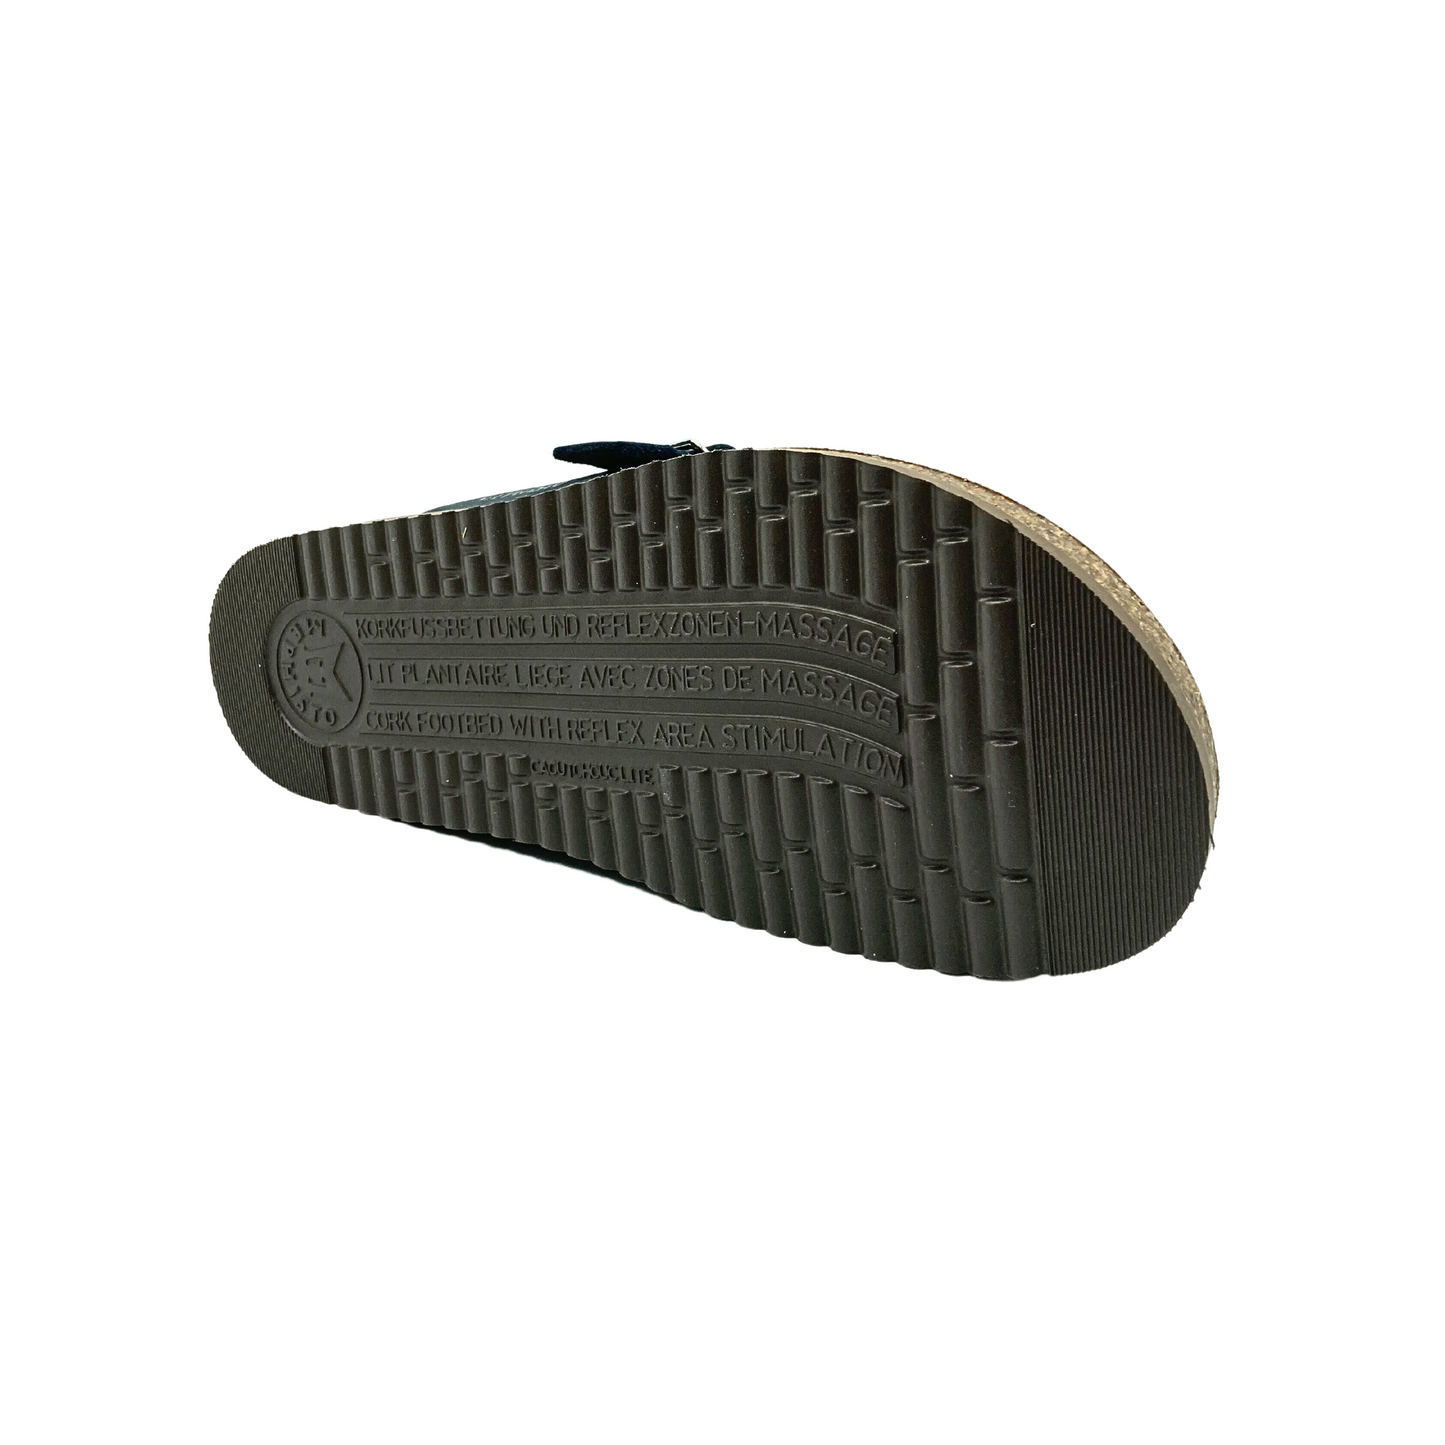 Sole of right shoe.  Stiff sole with a good grip so no matter what you step on you will not feel discomfort.